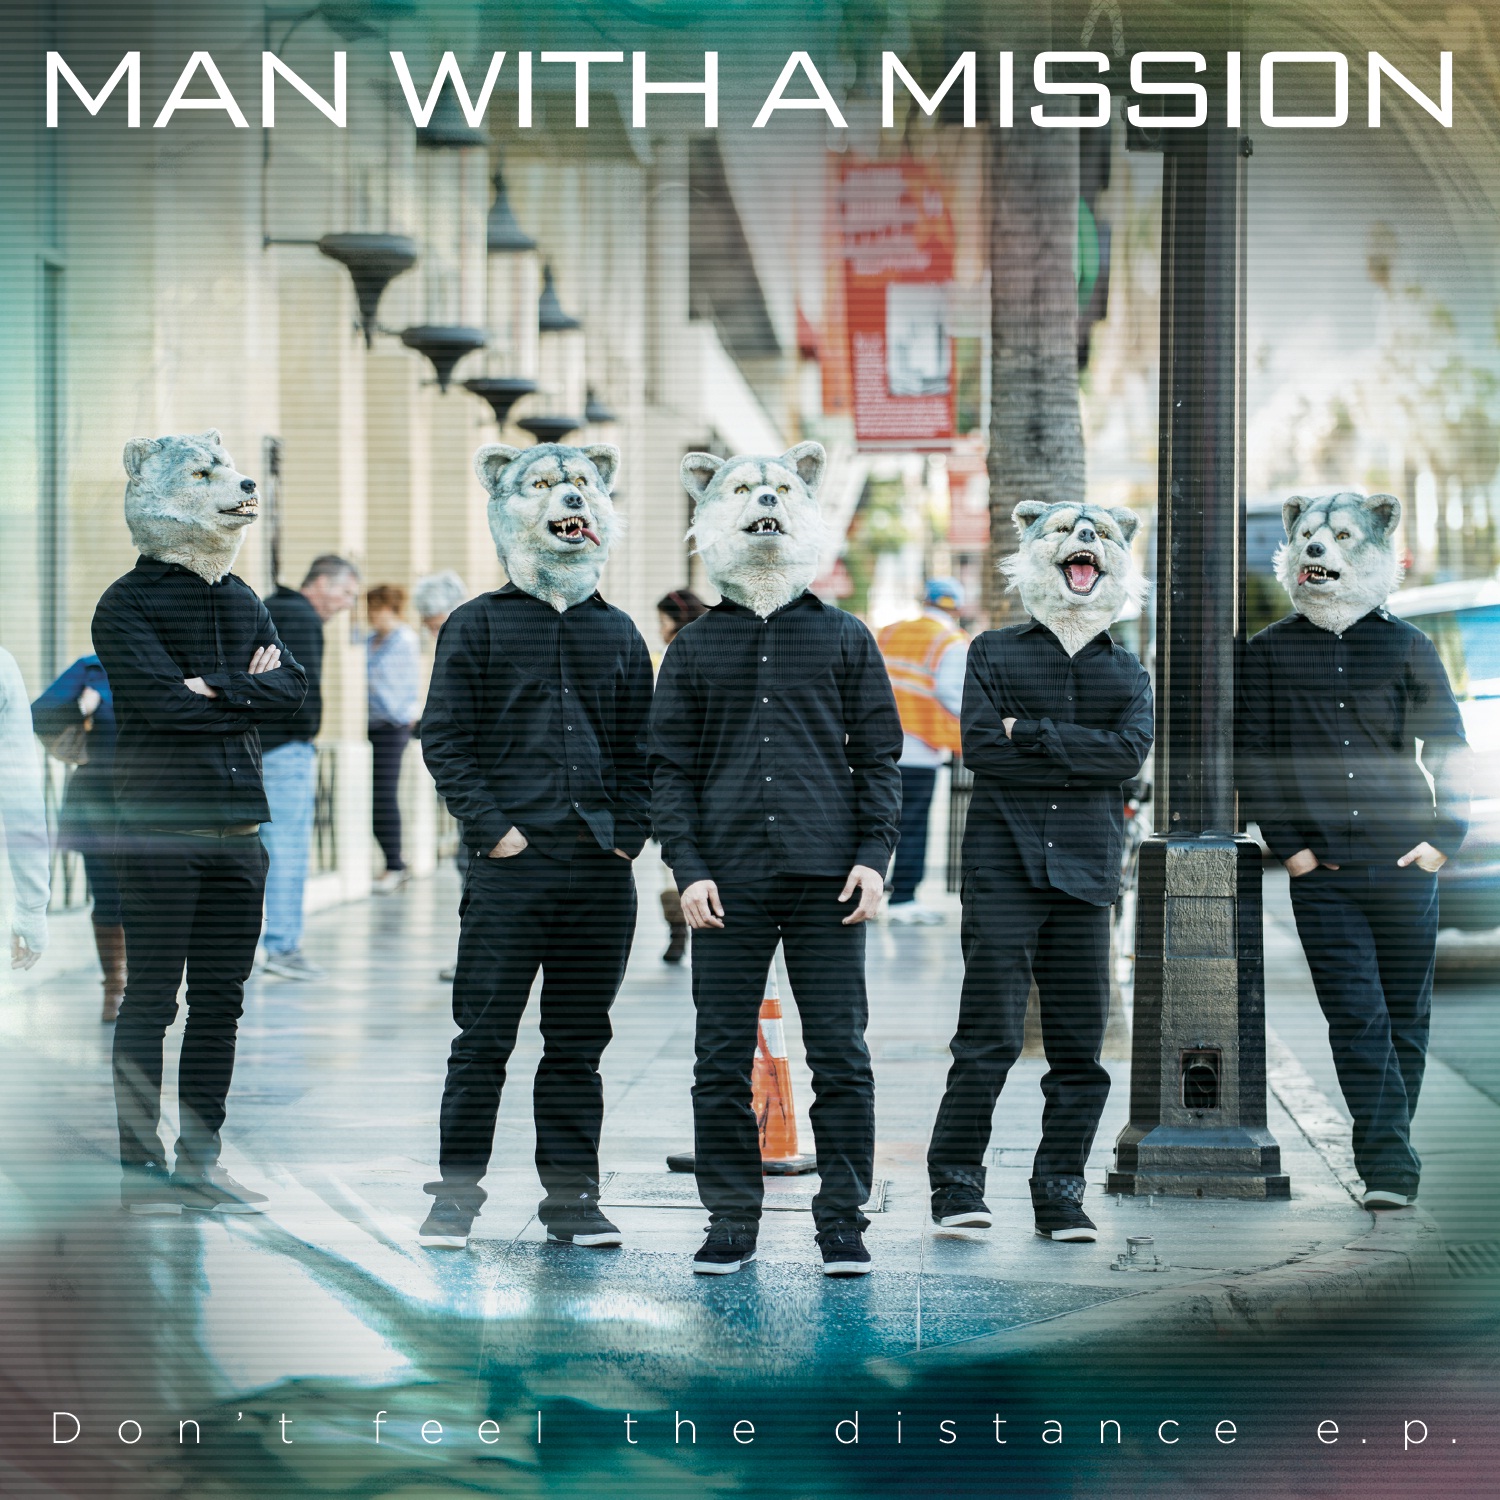 Man With A Mission 画像まとめ 280枚以上 壁紙 高画質 Naver まとめ